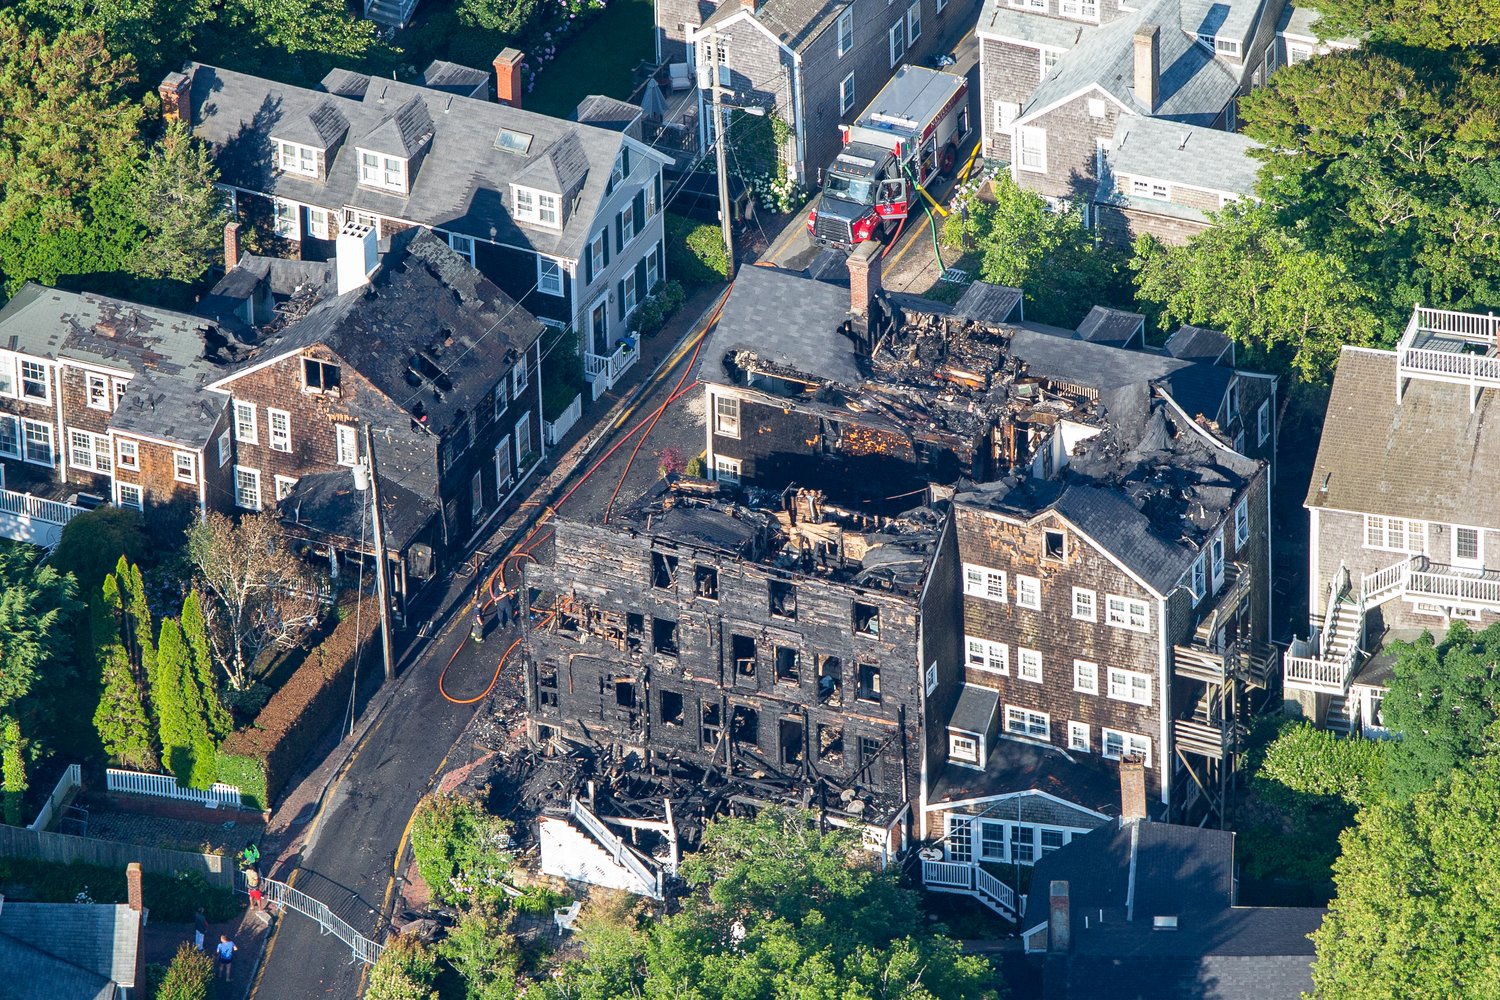 An aerial view of the destruction on Step Lane.